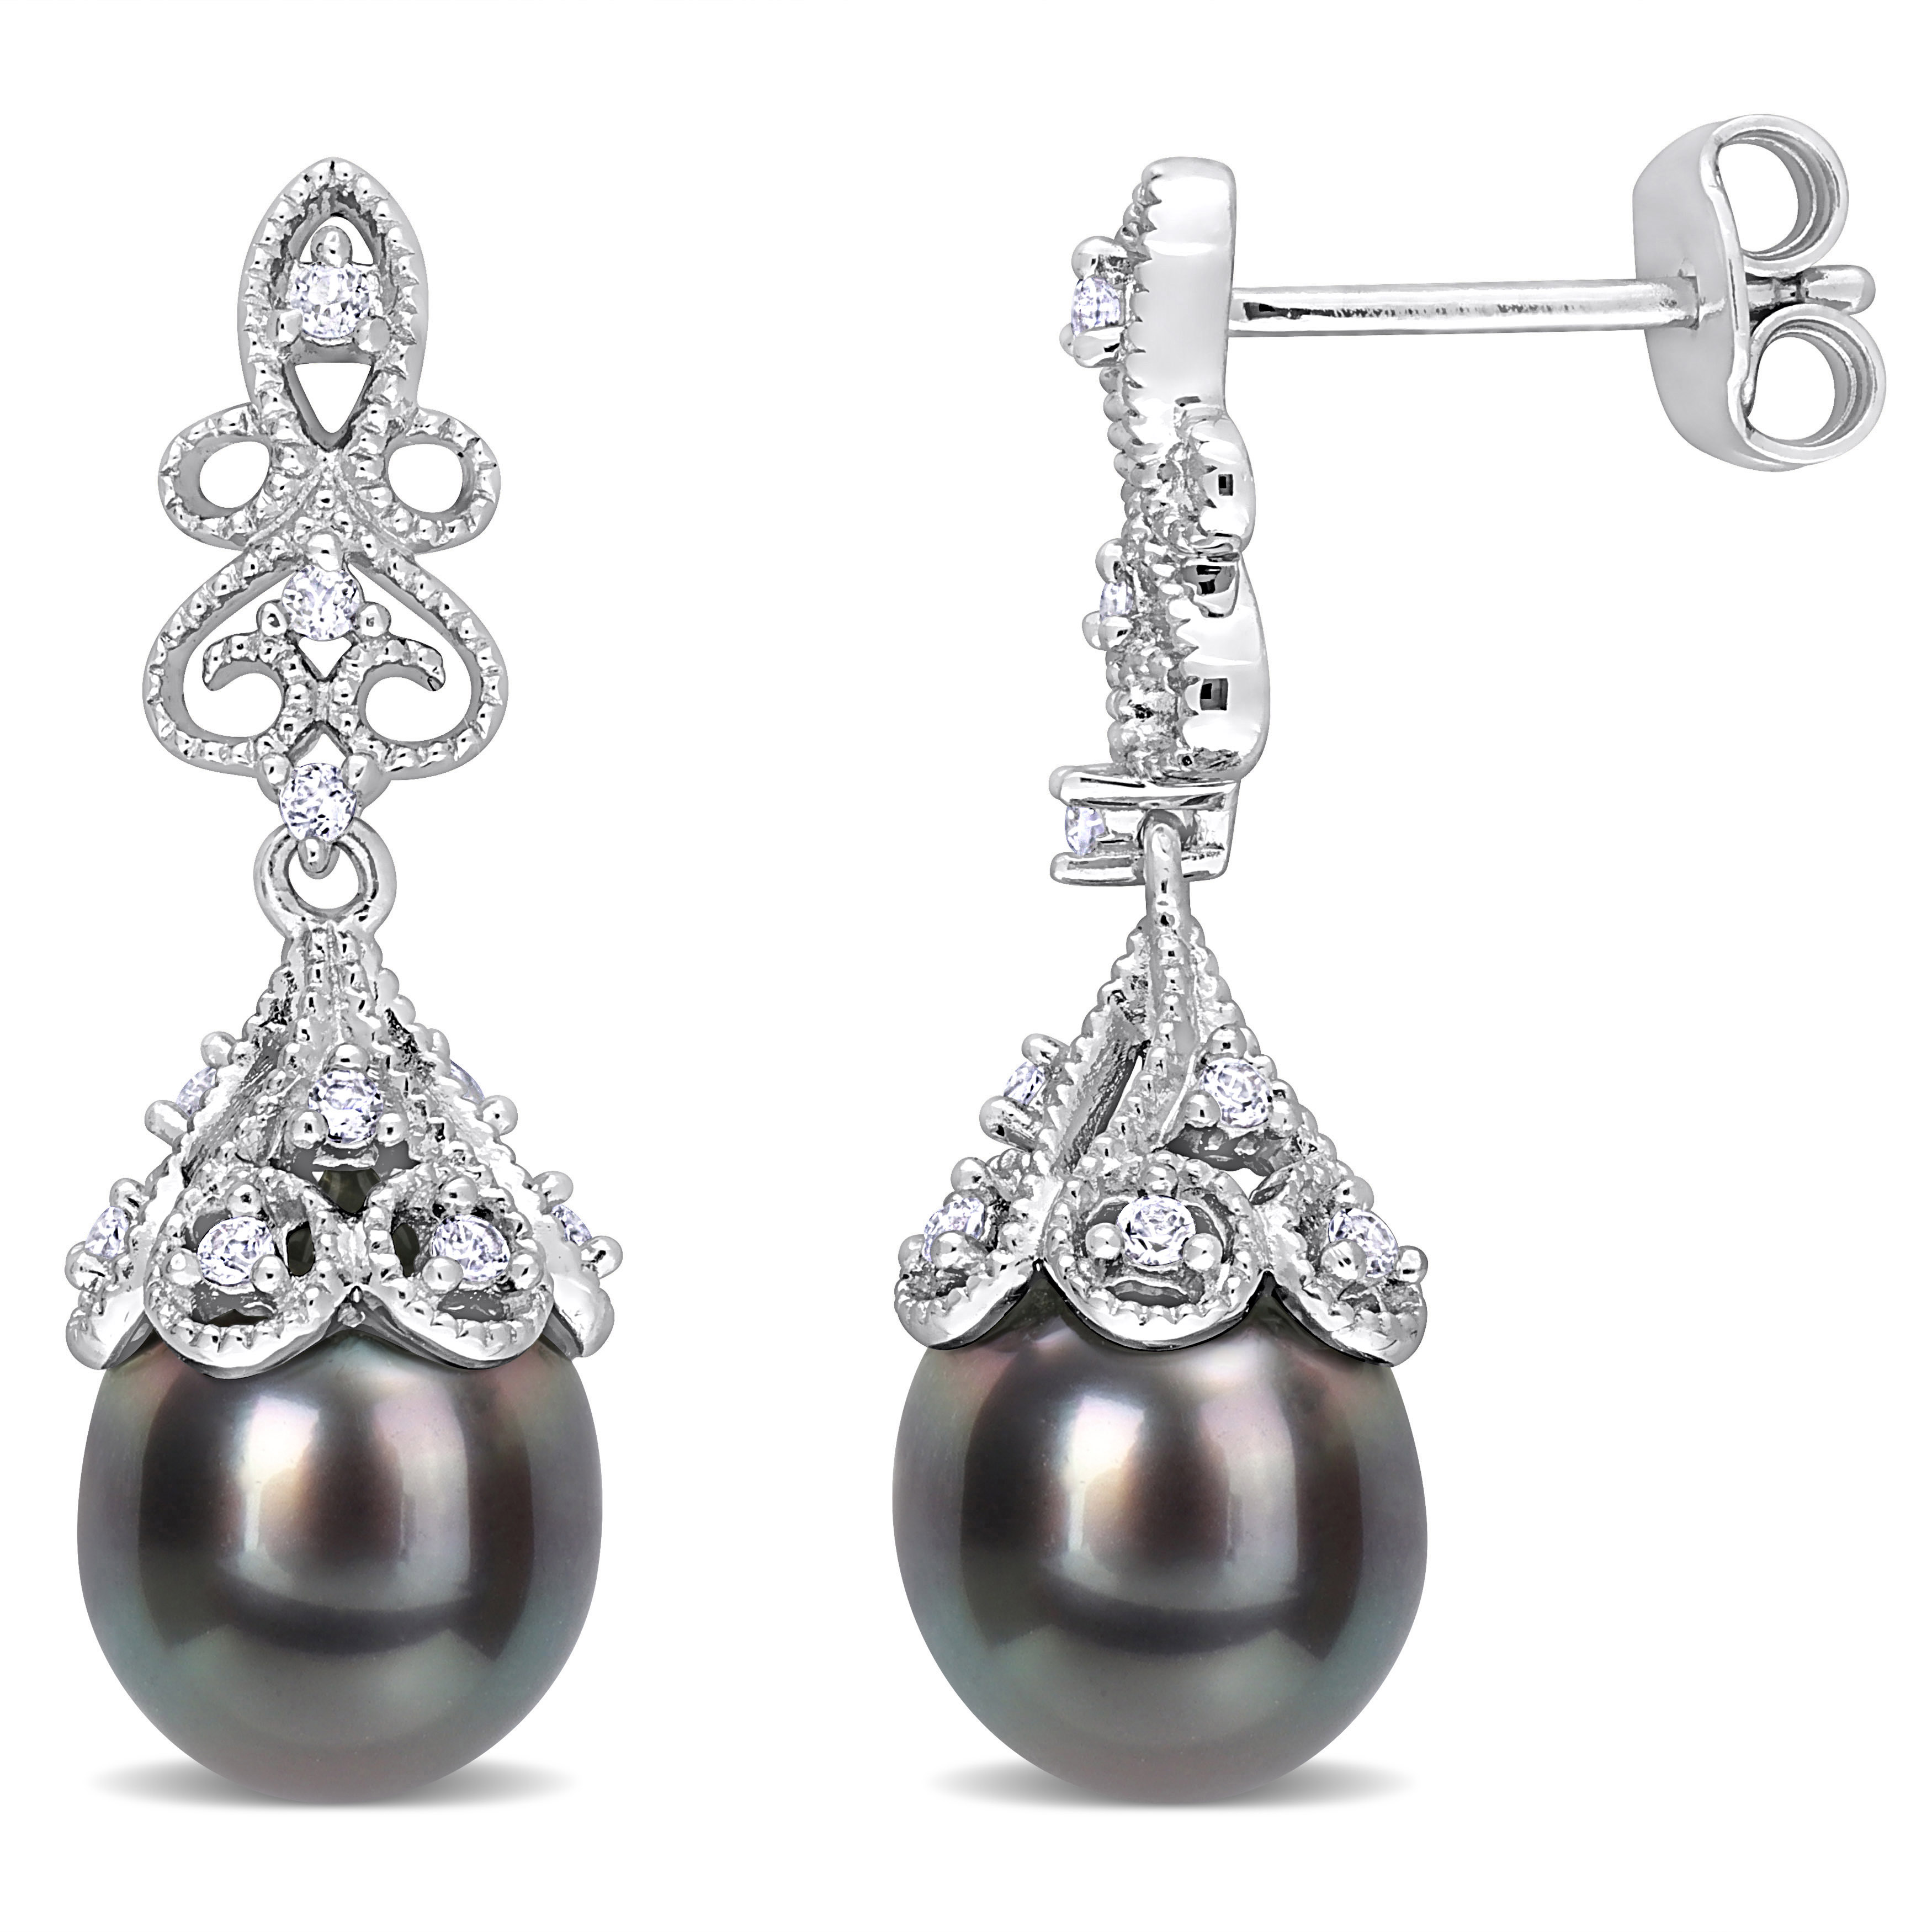 8-8.5 MM Black Tahitian Cultured Pearl and 1/4 CT TGW White Topaz Drop Earrings in Sterling Silver